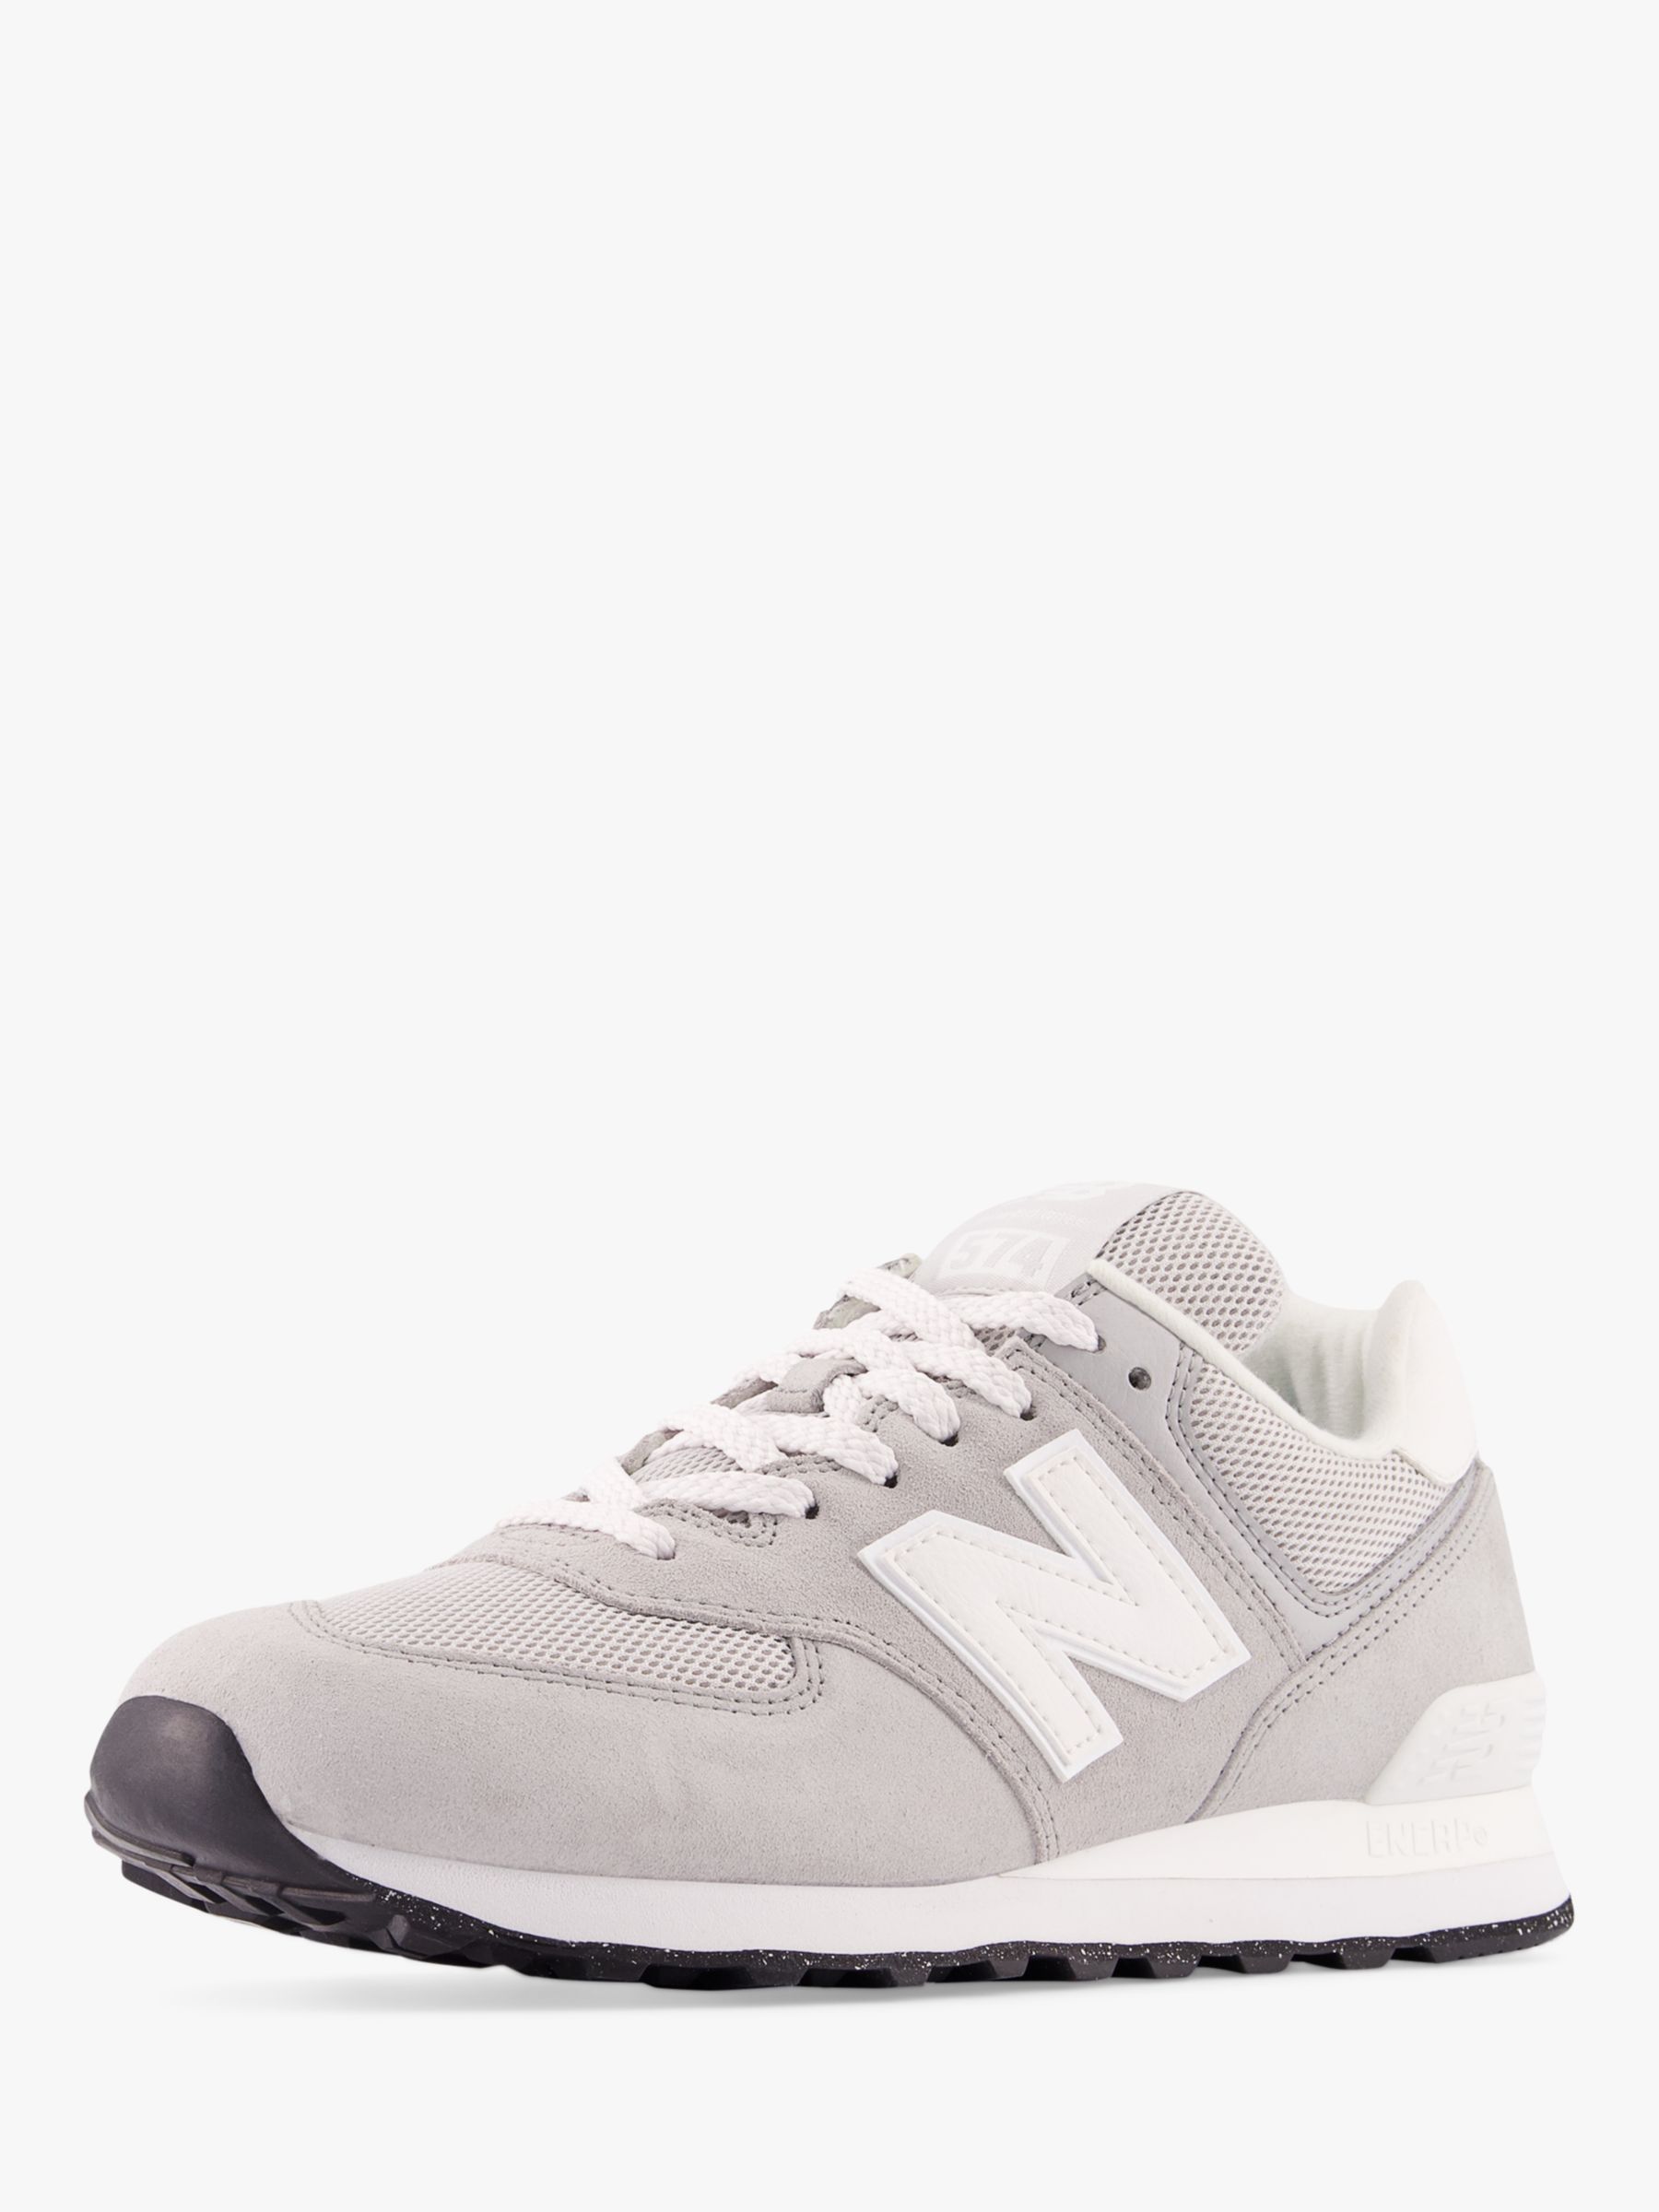 New Balance 574 Suede Mesh Trainers, Grey, 4